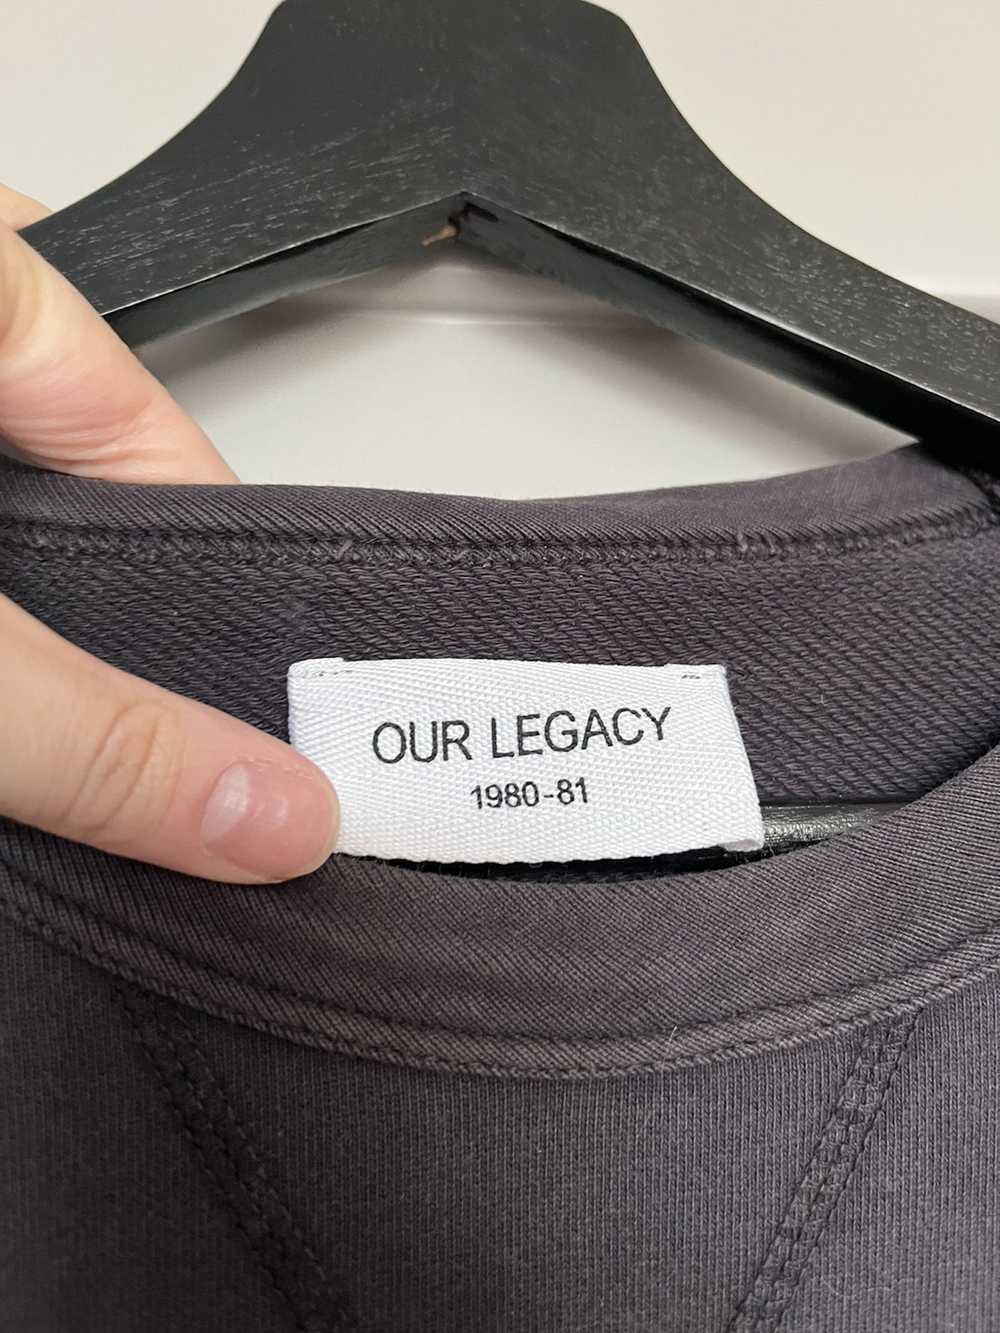 Our Legacy Our Legacy Sweatshirt - image 3